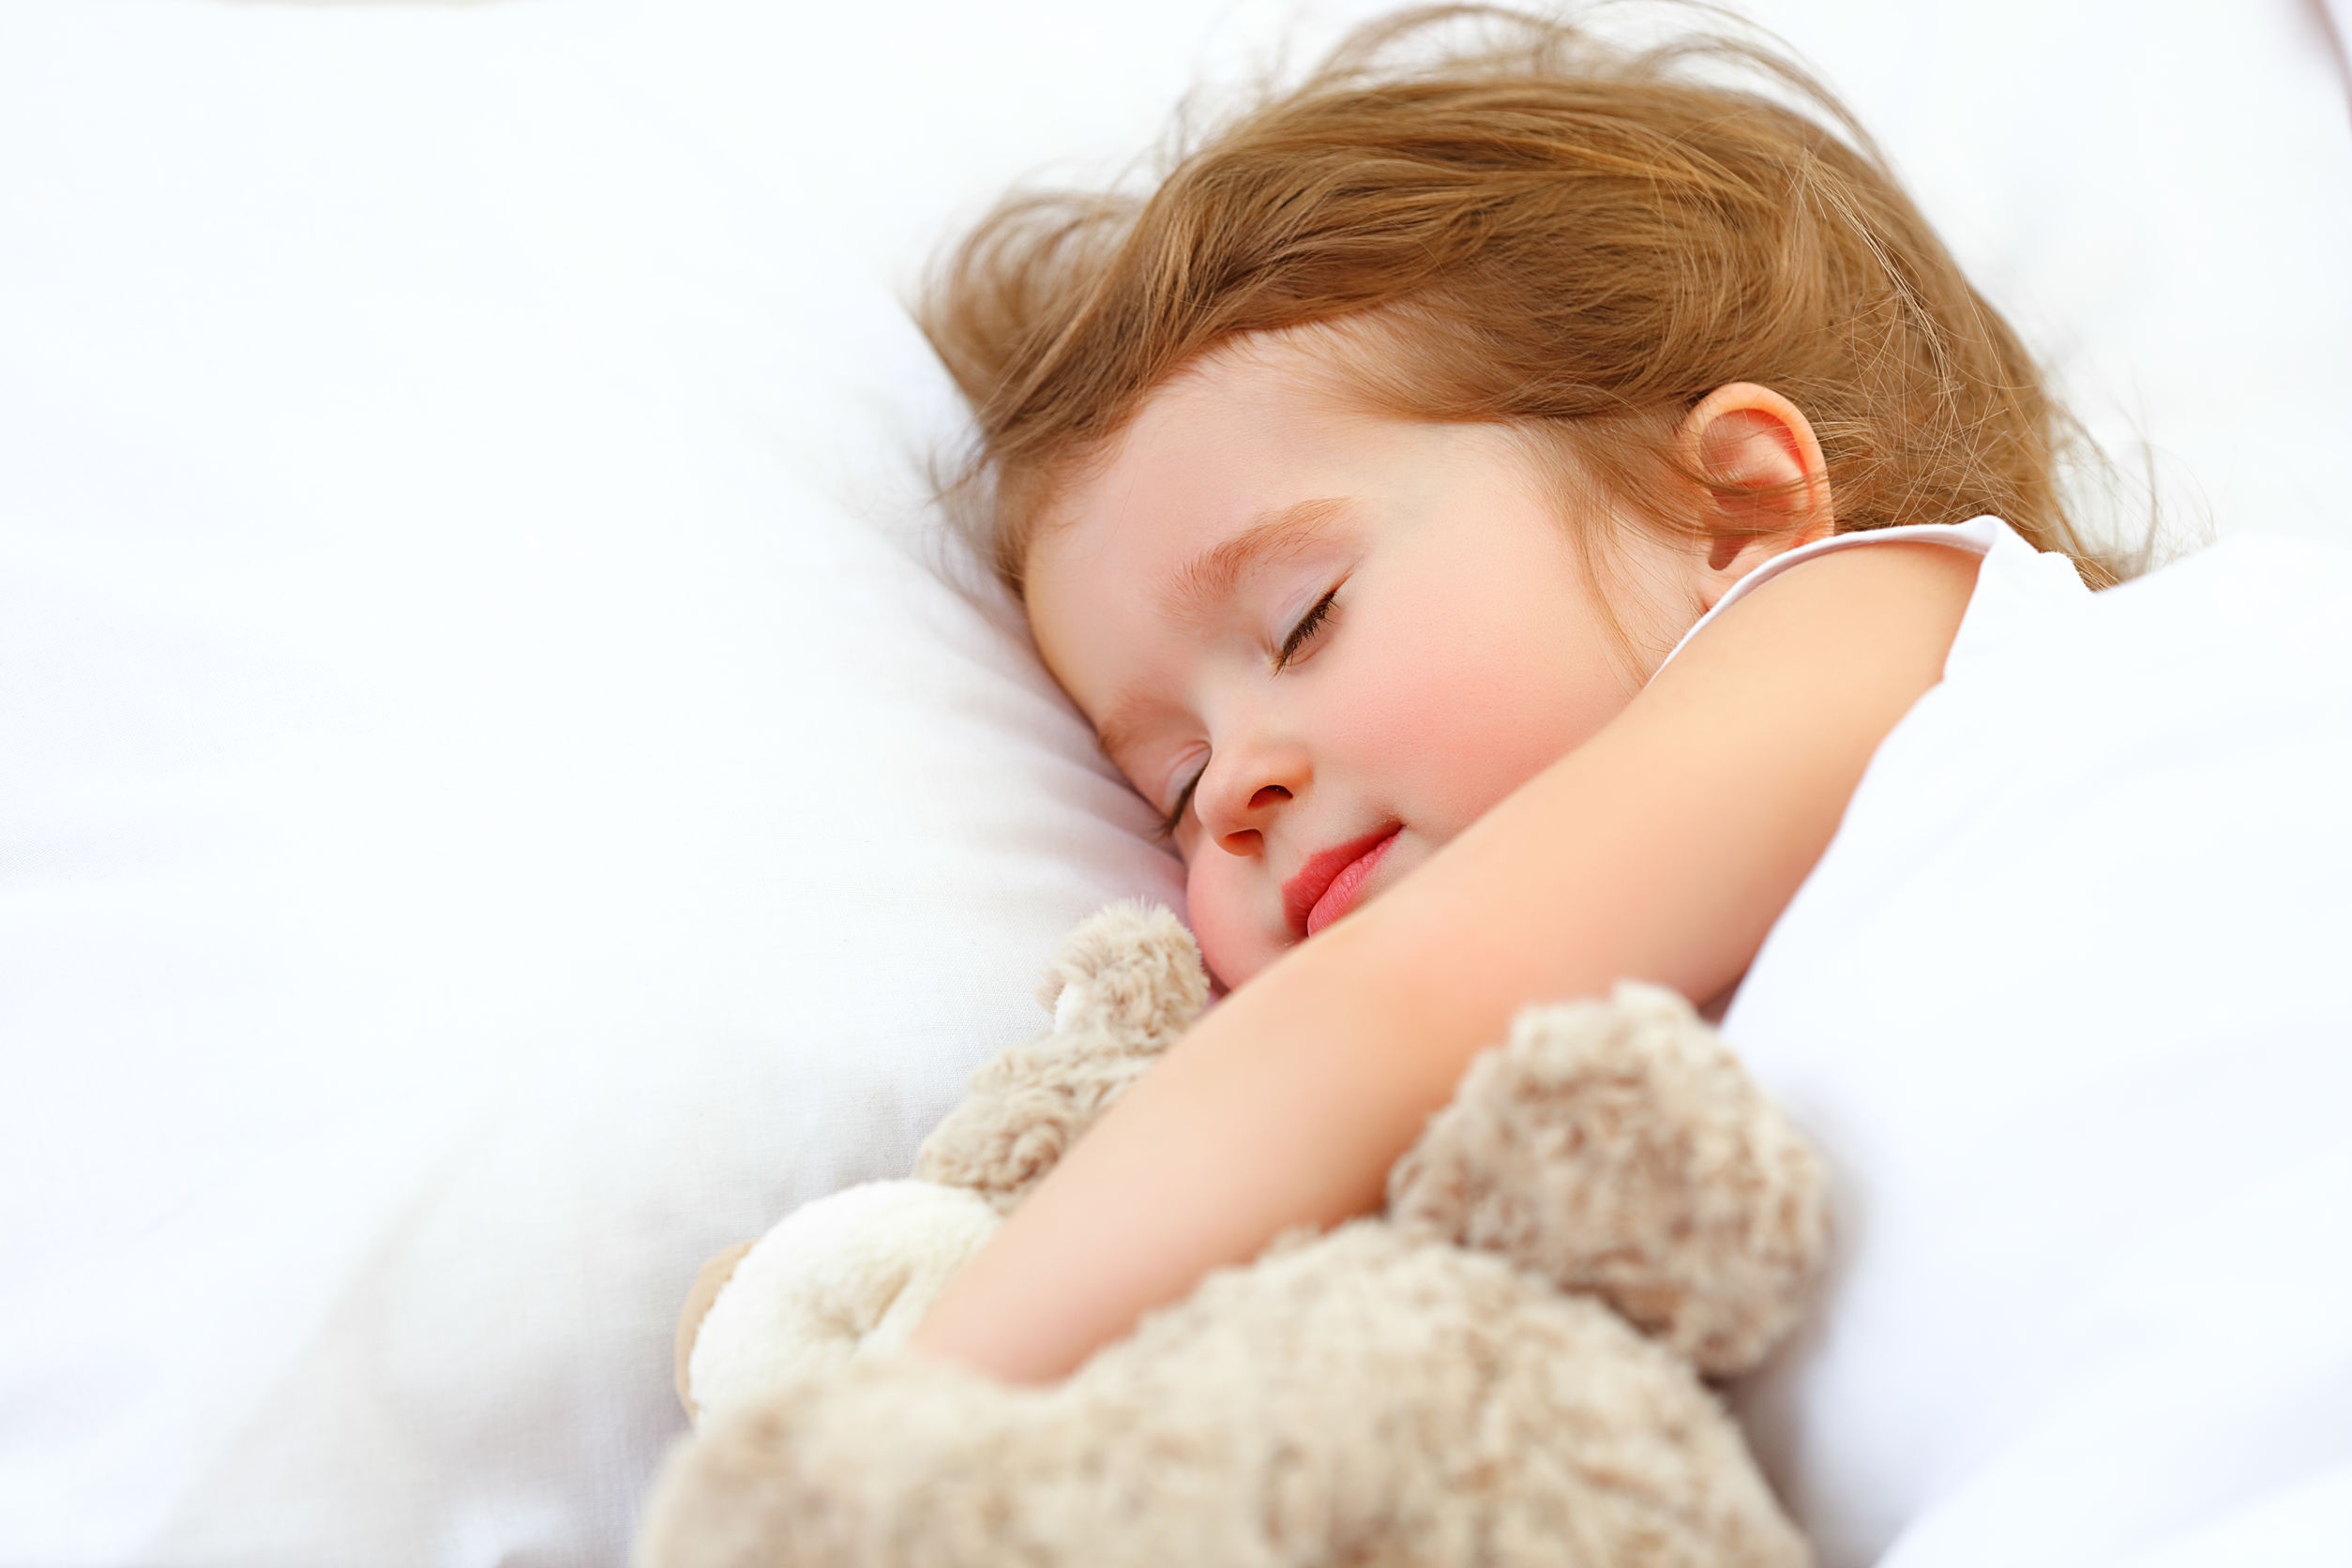 Healthy Sleep Habits, Happy Child by Marc Weissbluth